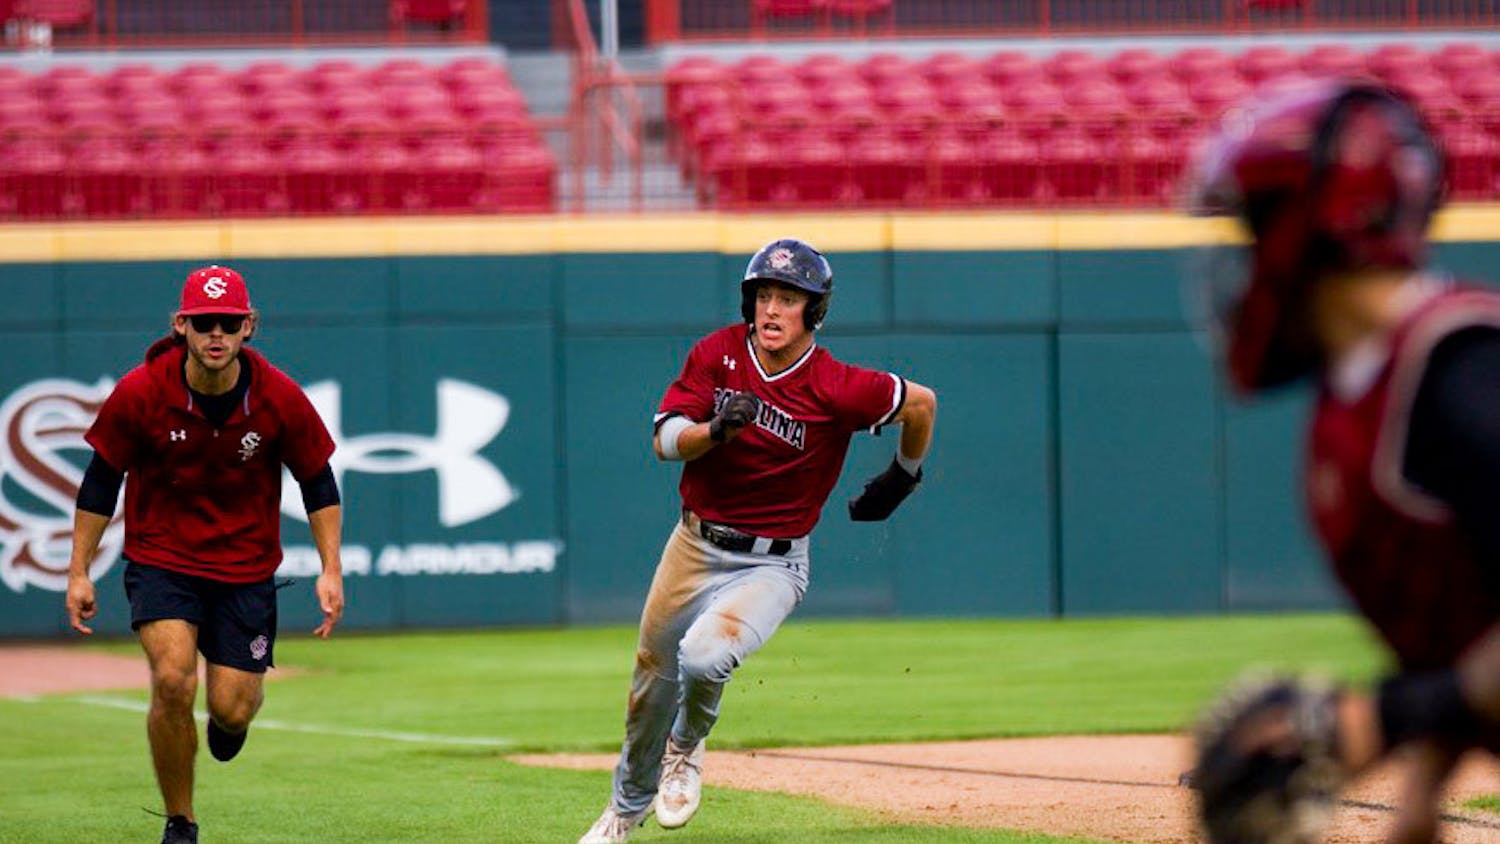 Sophomore outfielder Evan Stone rounds third base and slides into home, putting the Garnet team up 2-0 against the Black team on Nov. 5, 2022. Stone scored a total of 16 runs for the Gamecocks in the 2022 season.&nbsp;